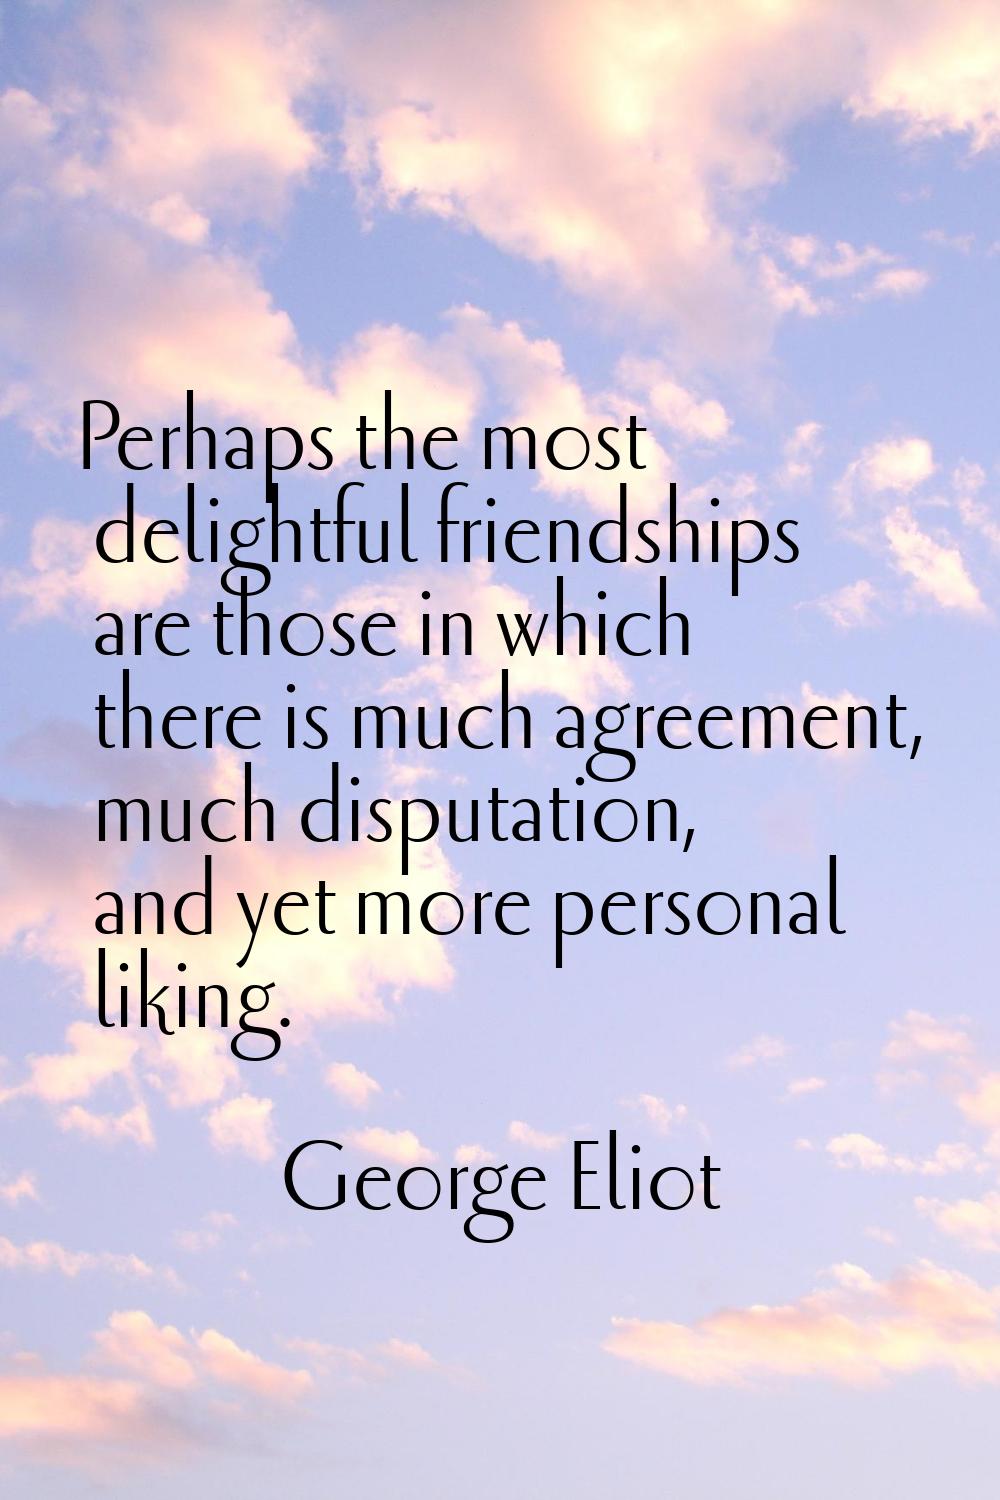 Perhaps the most delightful friendships are those in which there is much agreement, much disputatio